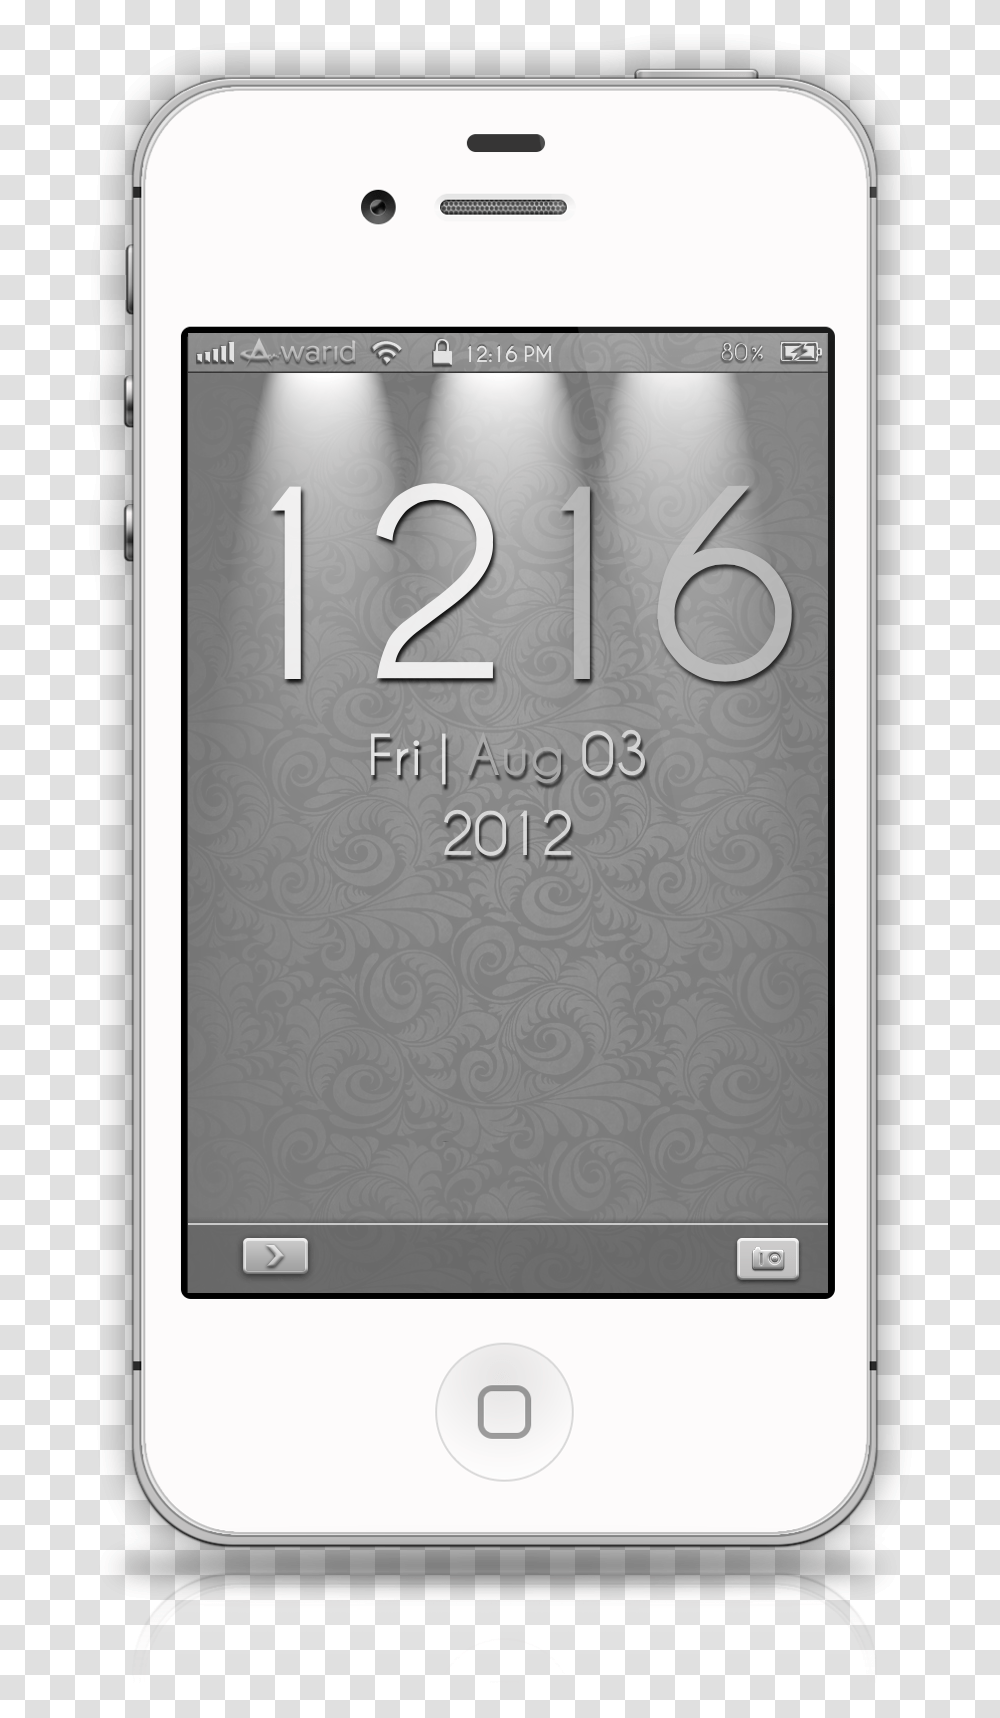 Lindo Light Hd 2 Smartphone, Mobile Phone, Electronics, Cell Phone Transparent Png